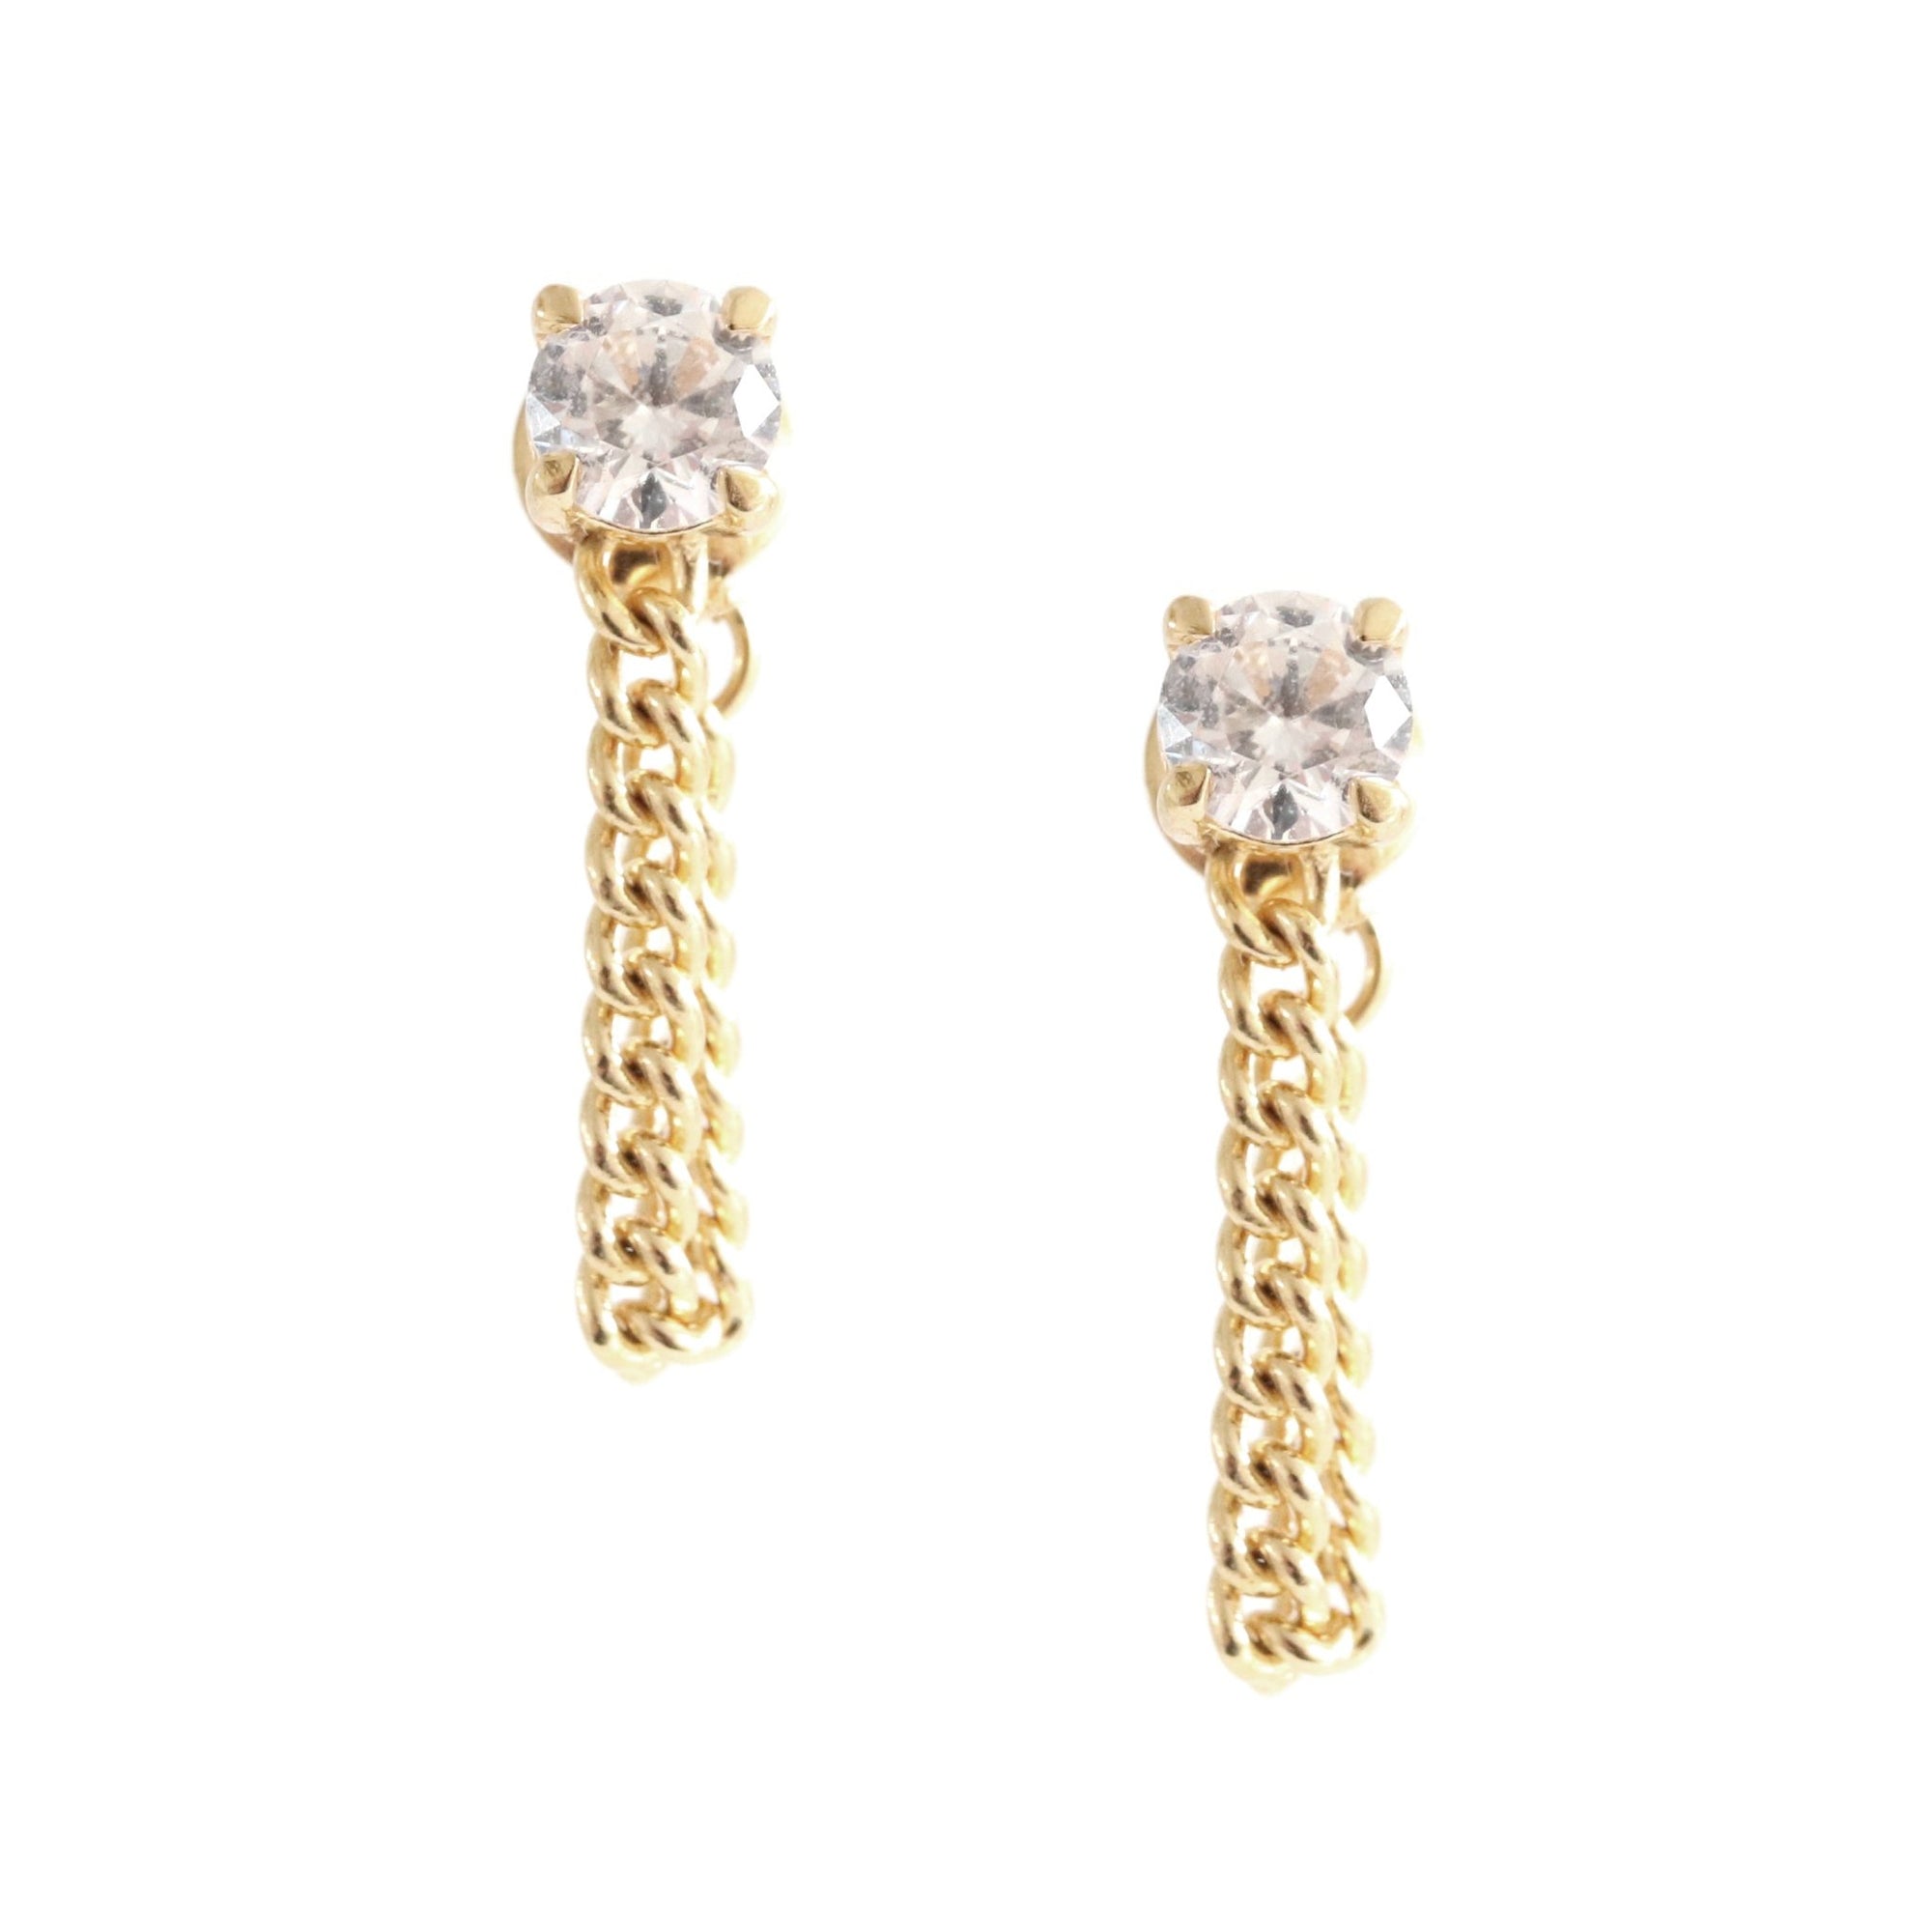 LOVE CABLE LINK CHAIN EARRINGS - CUBIC ZIRCONIA & GOLD - SO PRETTY CARA COTTER